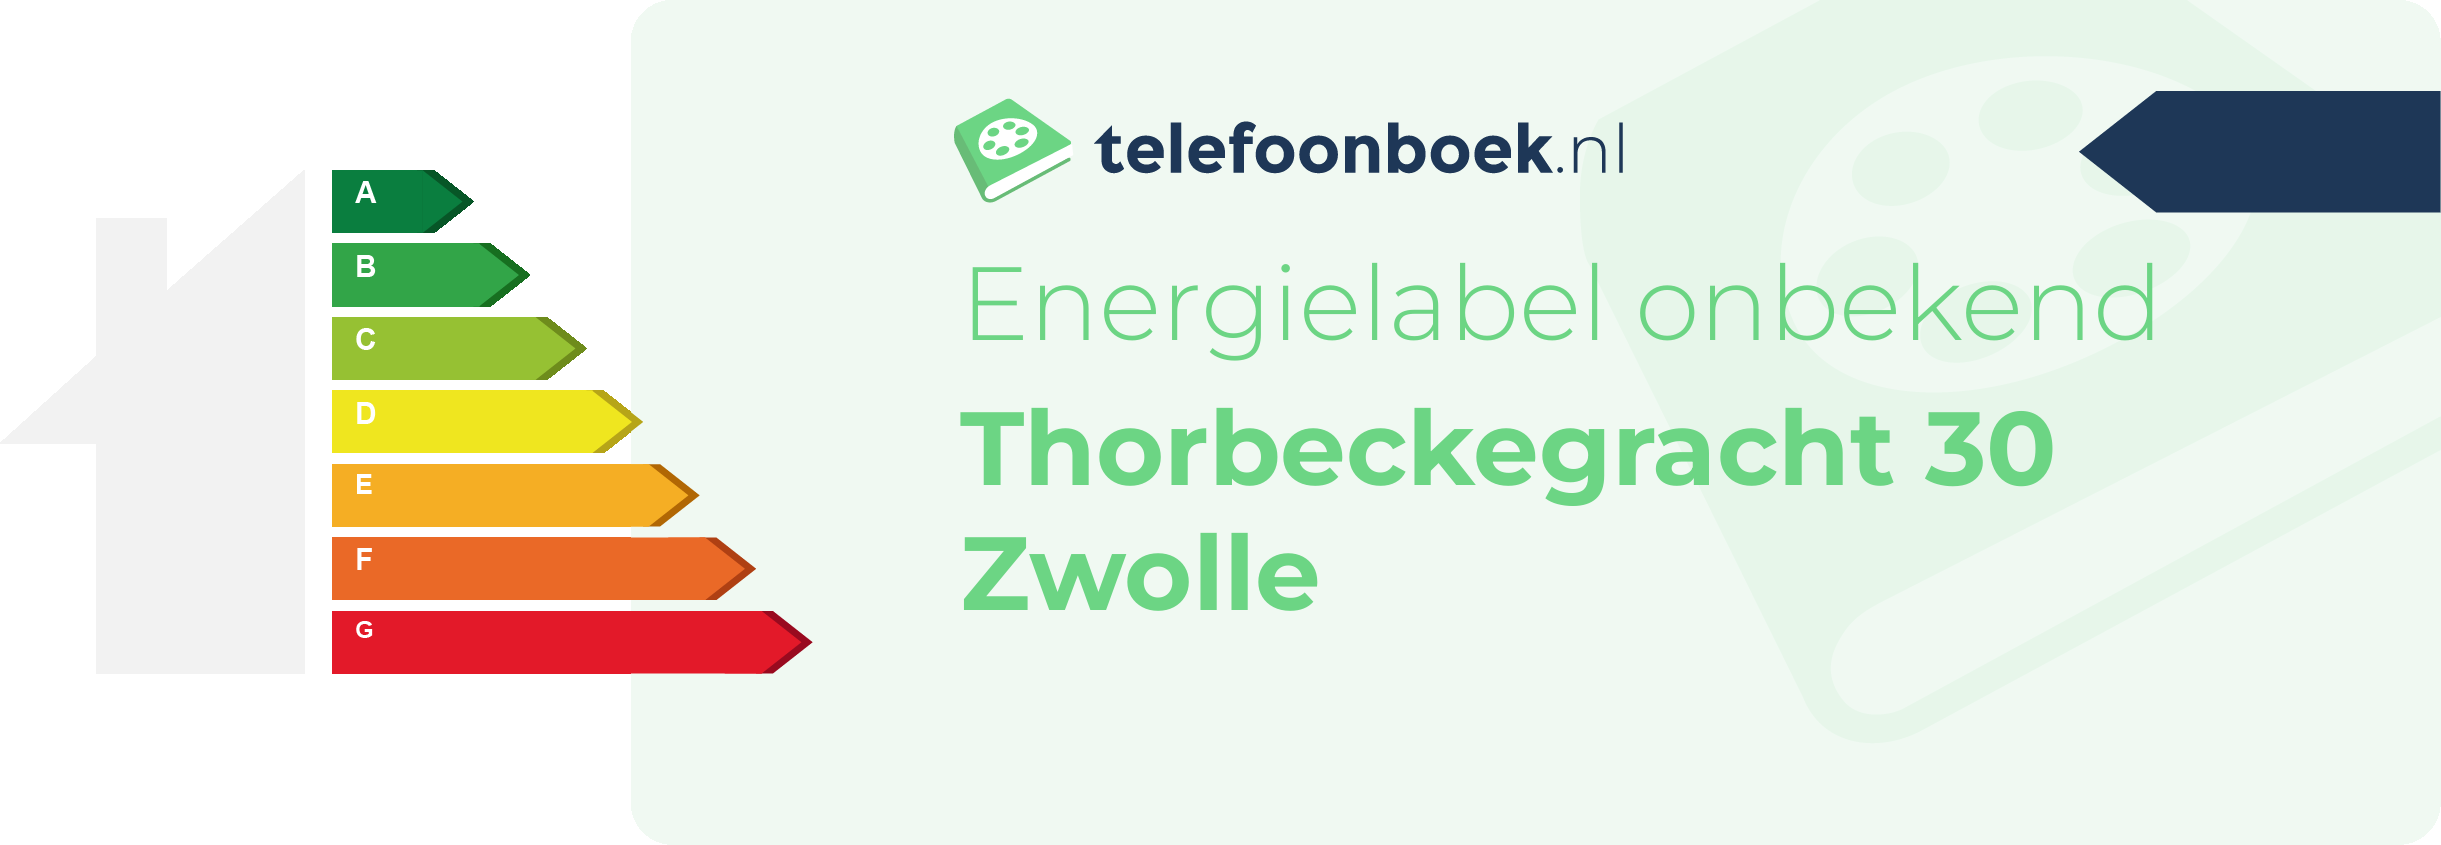 Energielabel Thorbeckegracht 30 Zwolle